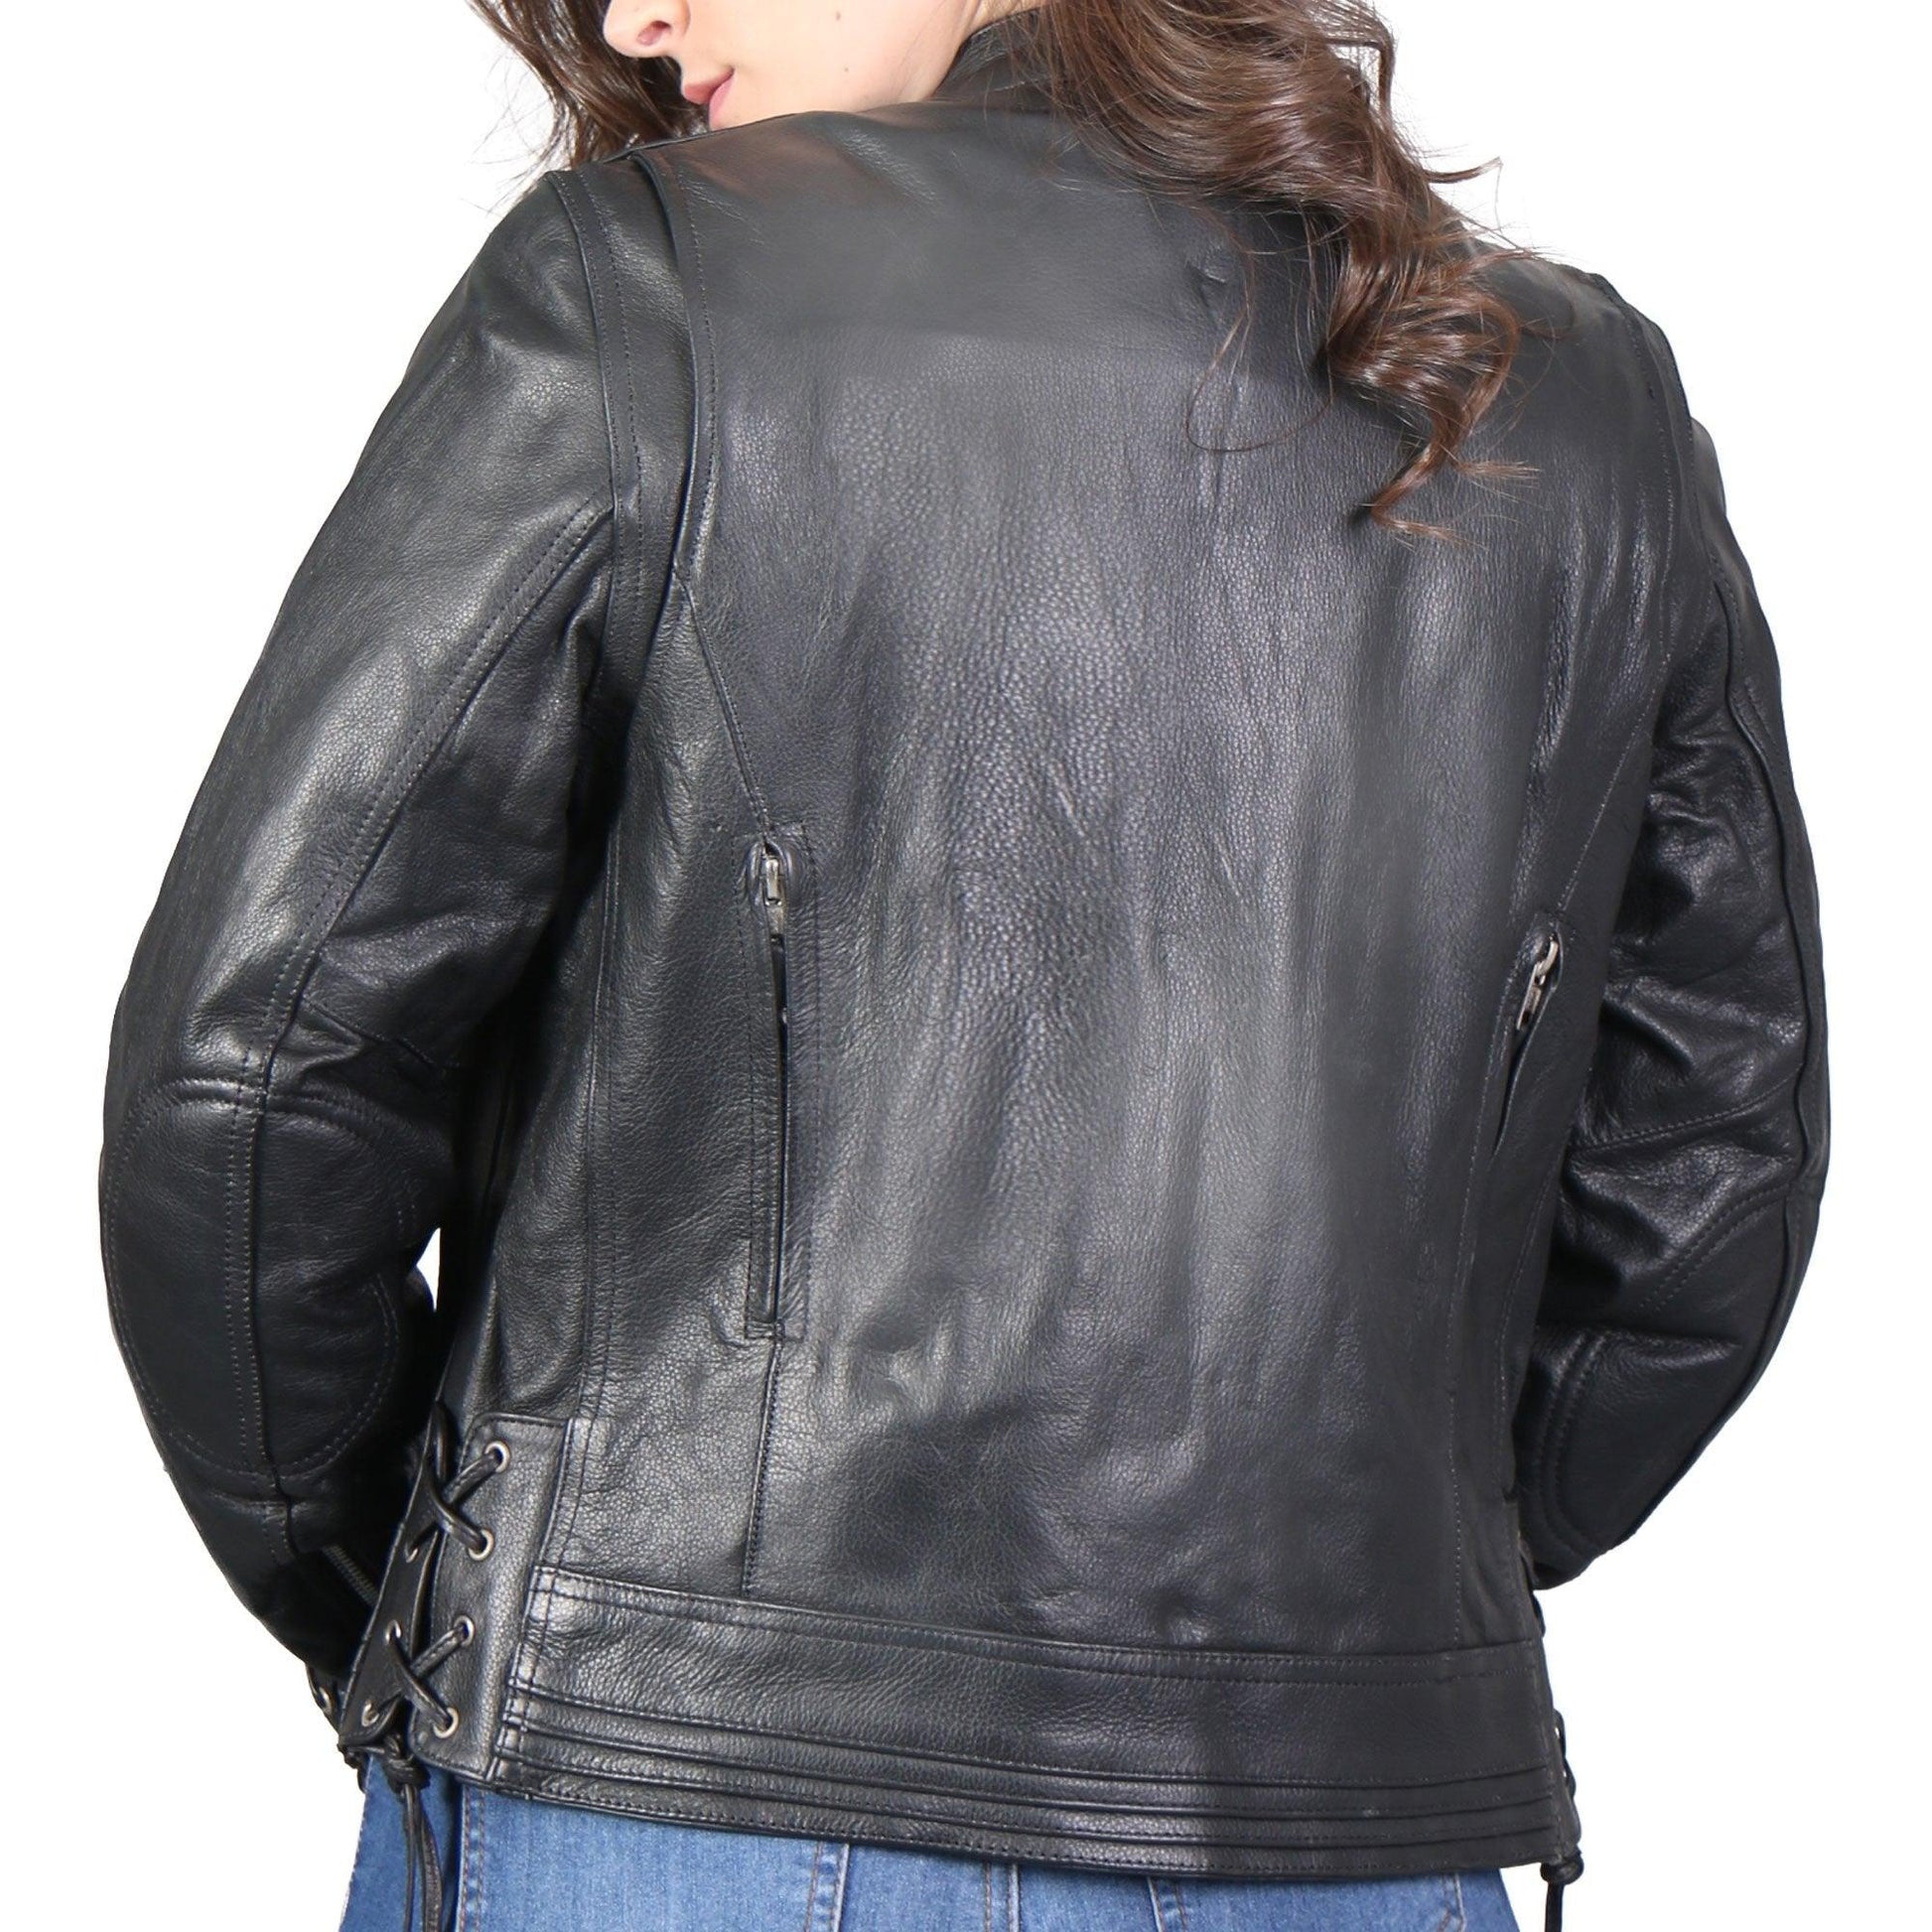 Ladies Lace Up Sleeves Leather Jacket - Military Republic